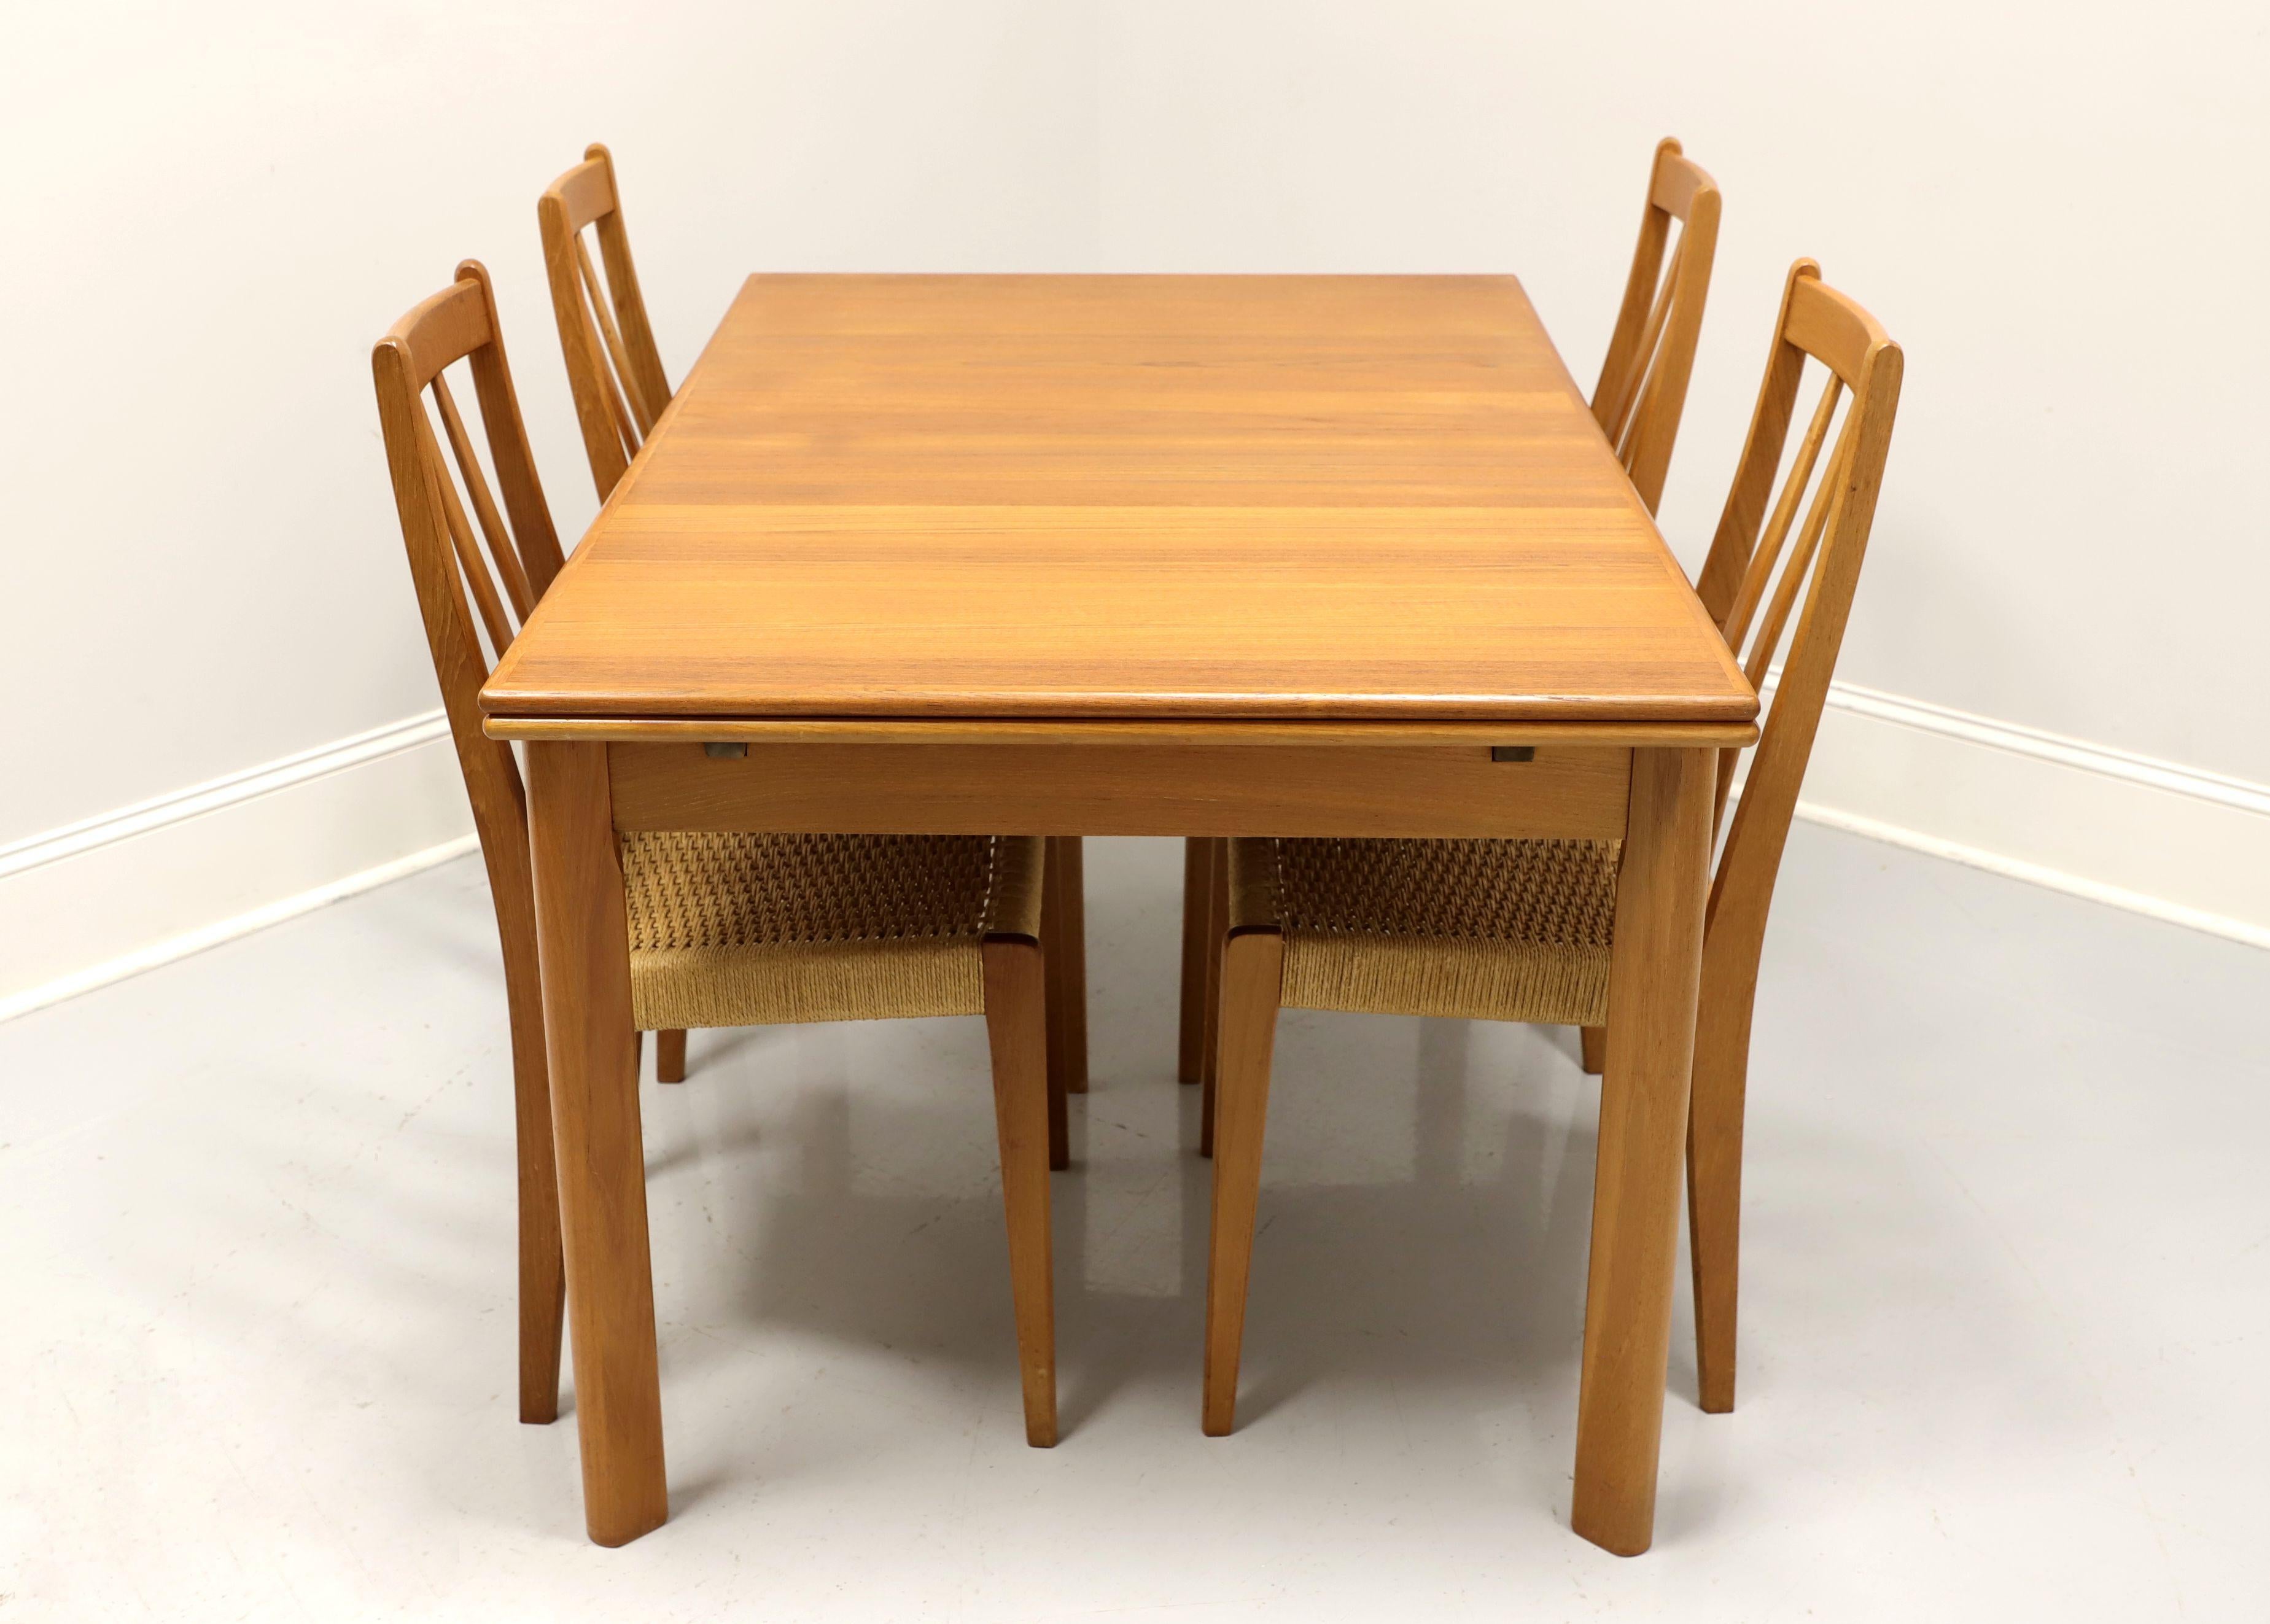 A Mid 20th Century Danish Modern dining set by BRDR FURBO. Solid teak table and chair frames with rush seats. Dining table has a banded top, two drawtop leaves that pull out from either end of the table by lifting the top, and rounded straight legs.